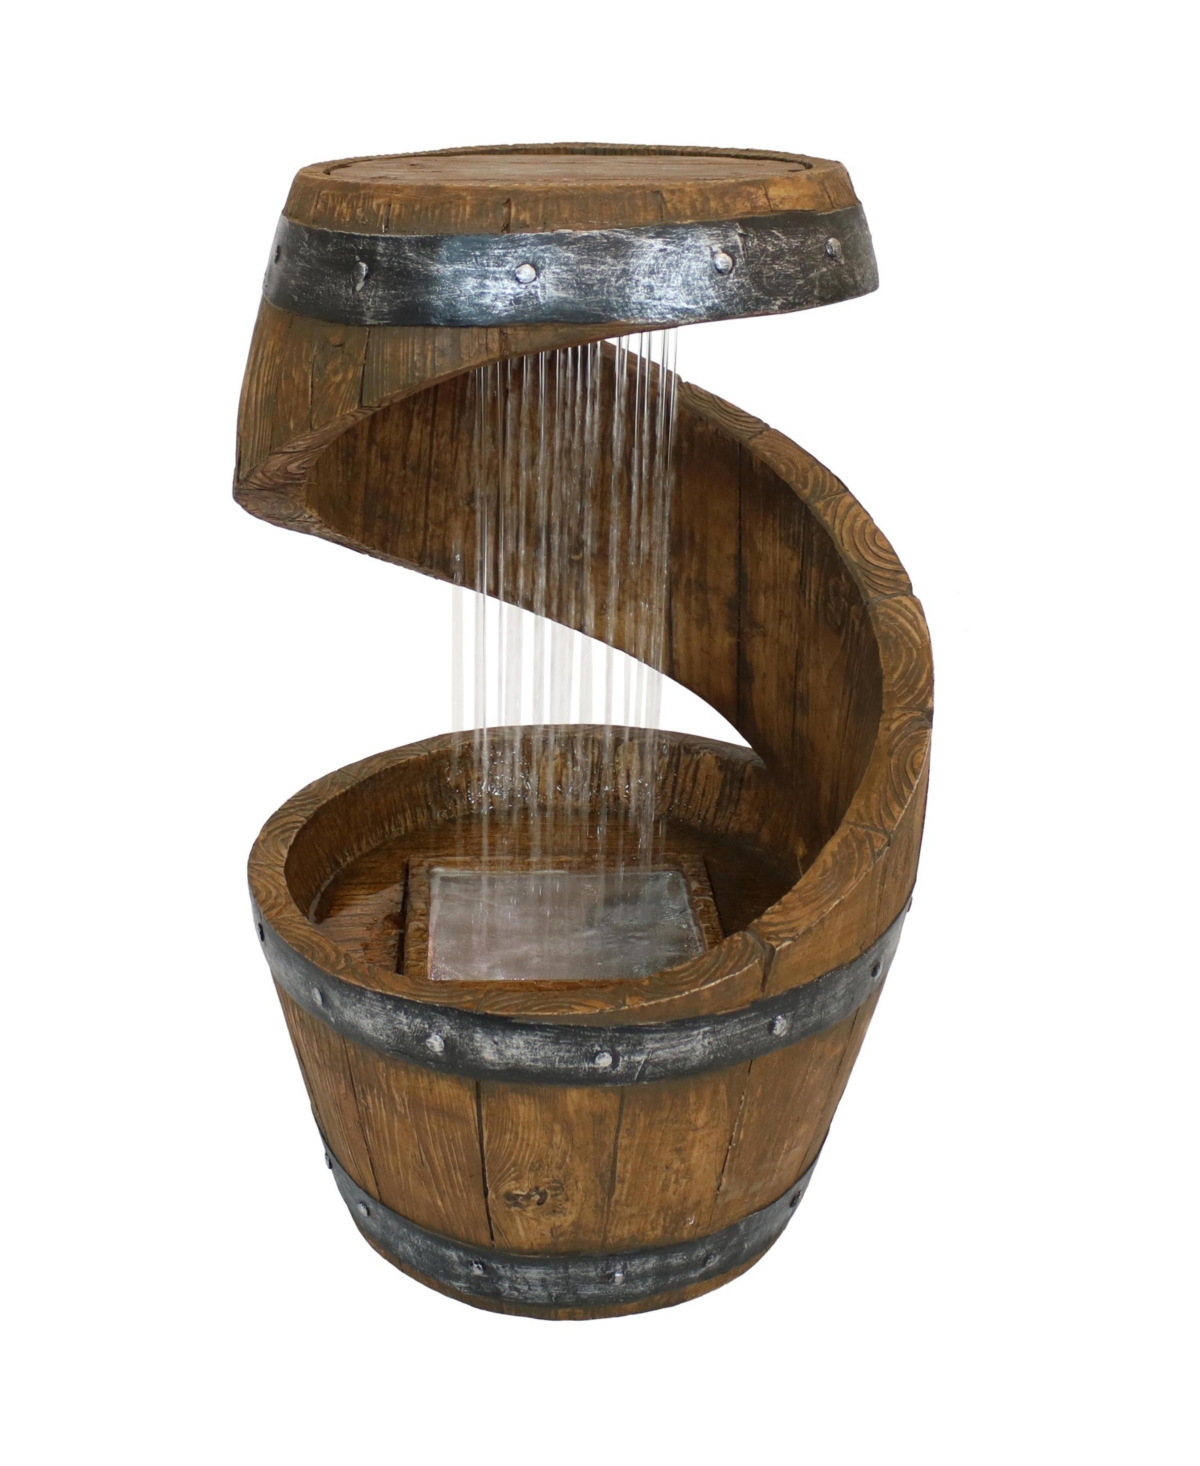 Spiraling Barrel Outdoor Water Fountain with Led Lights - 25 in - Brown